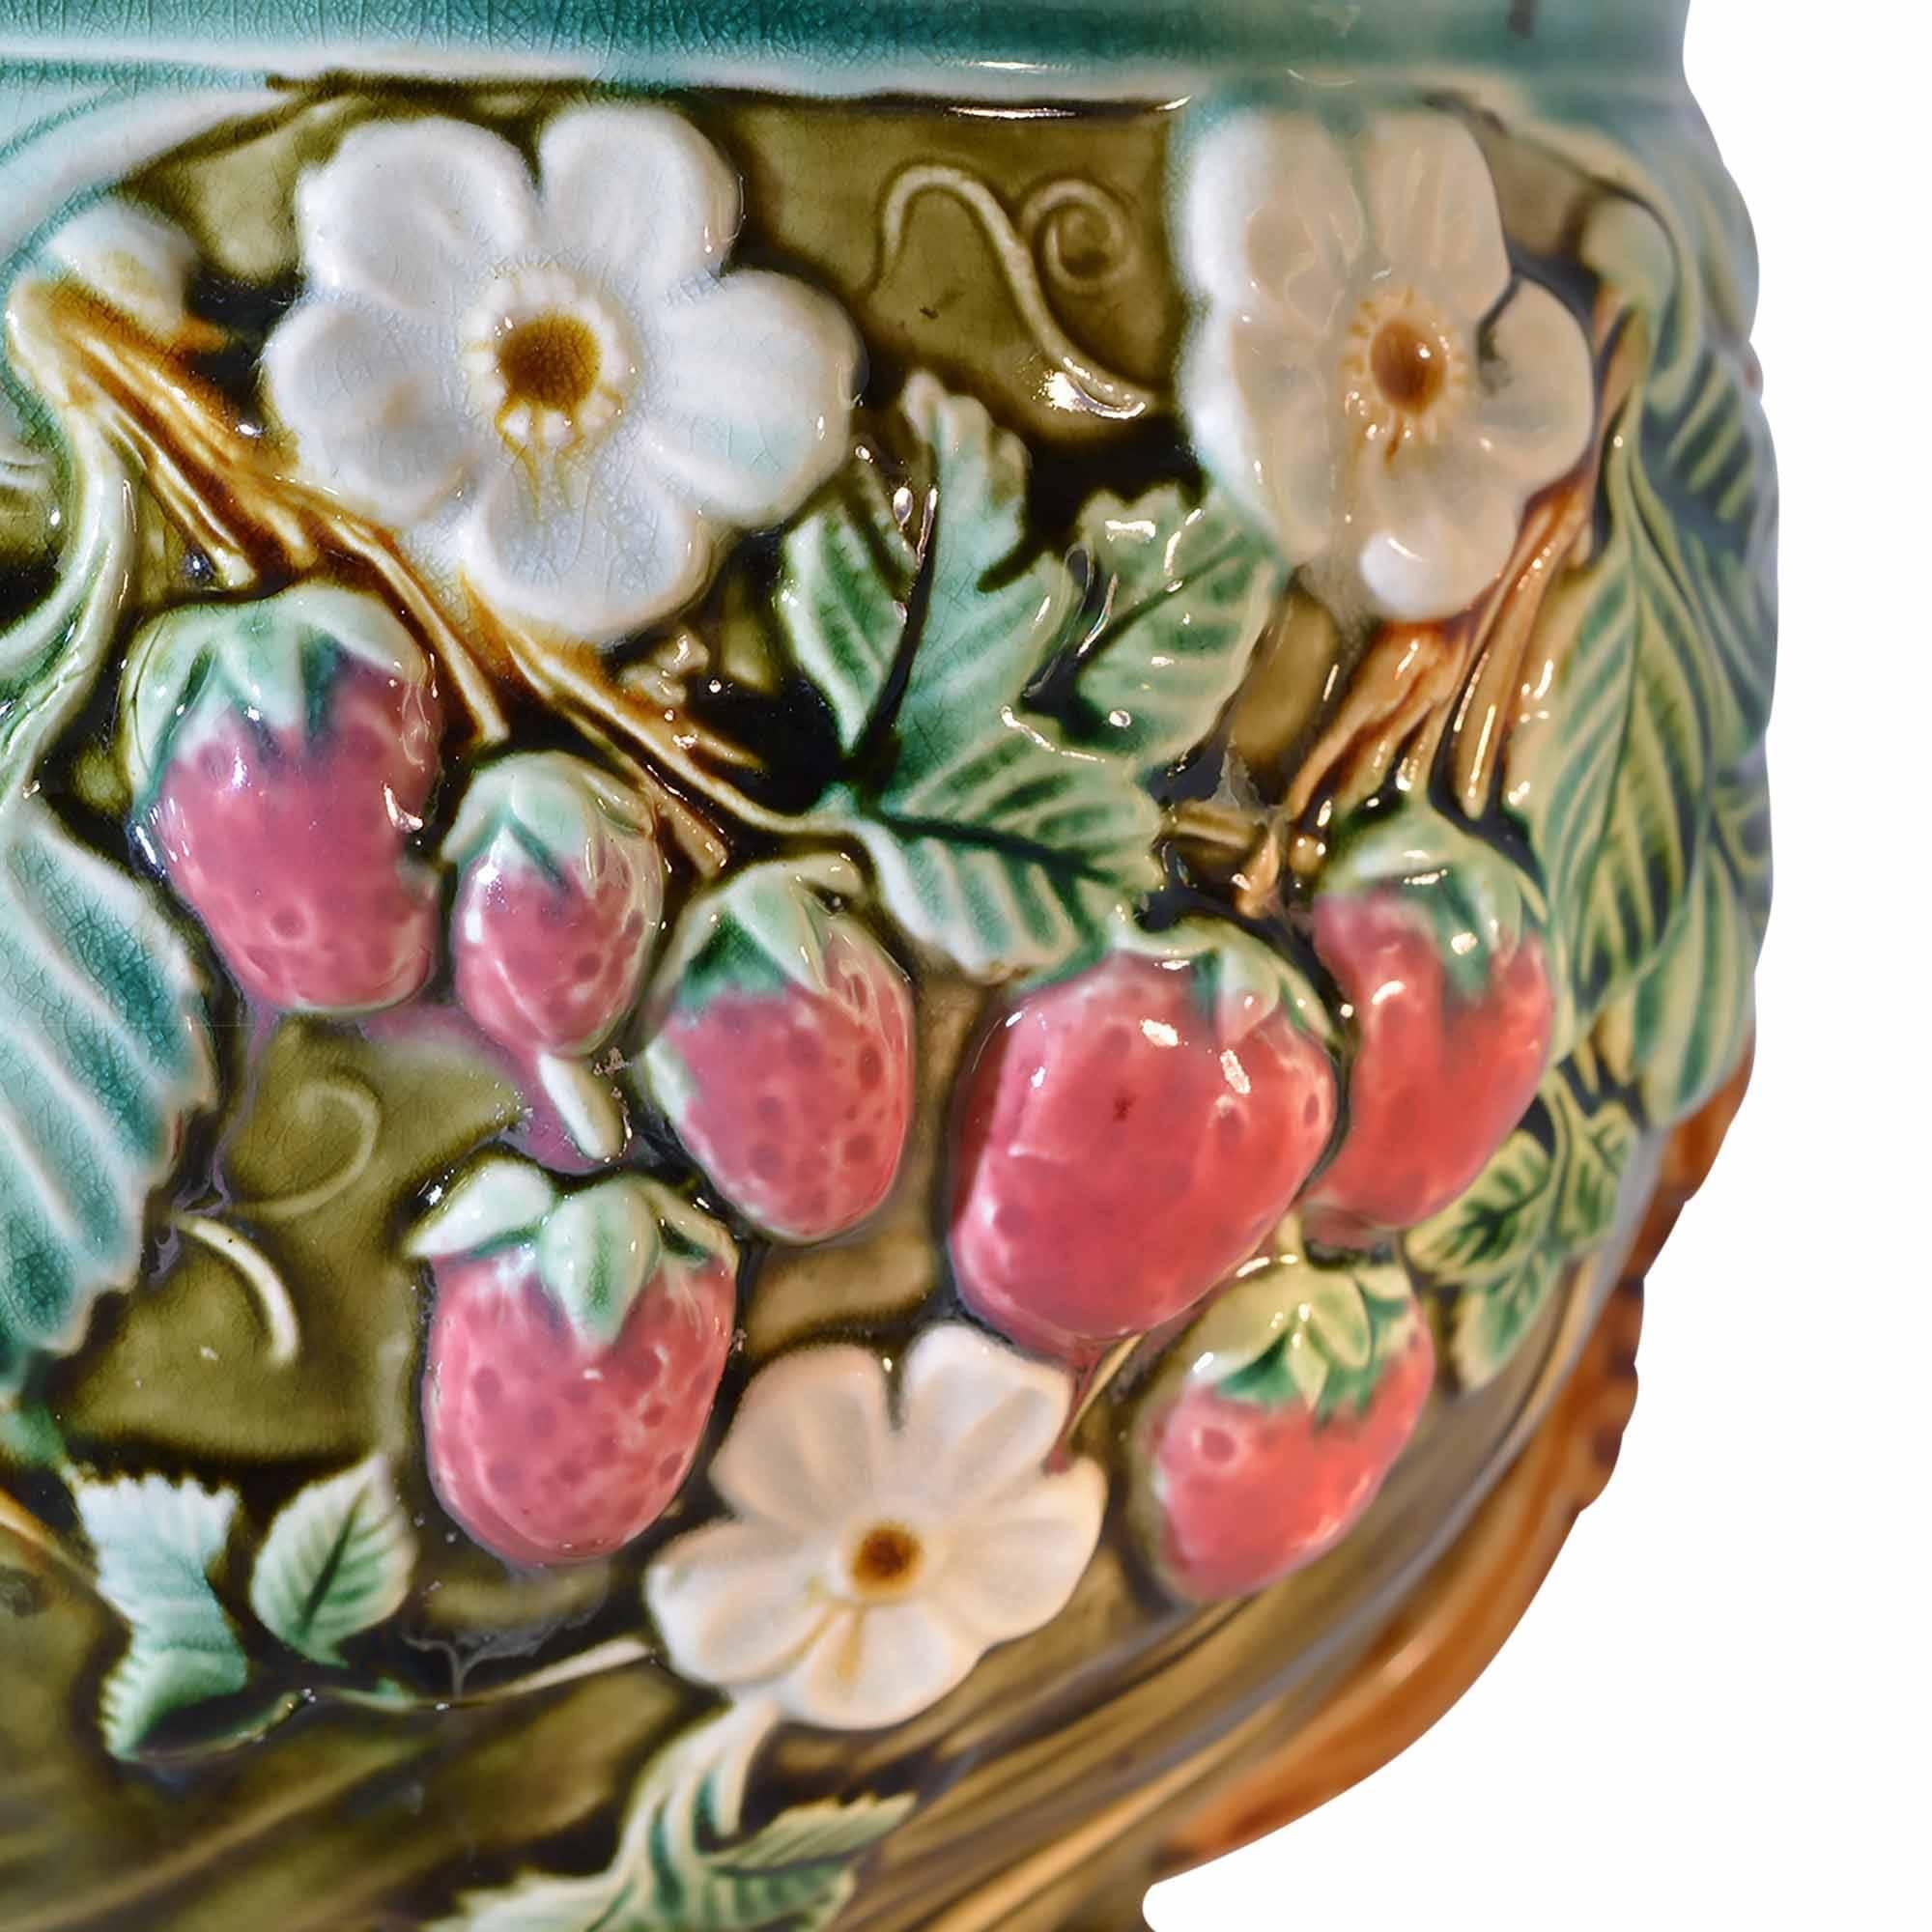 Antique Onnaing Majolica Jardinière Bowl with Strawberry Accents In Good Condition For Sale In Pataskala, OH